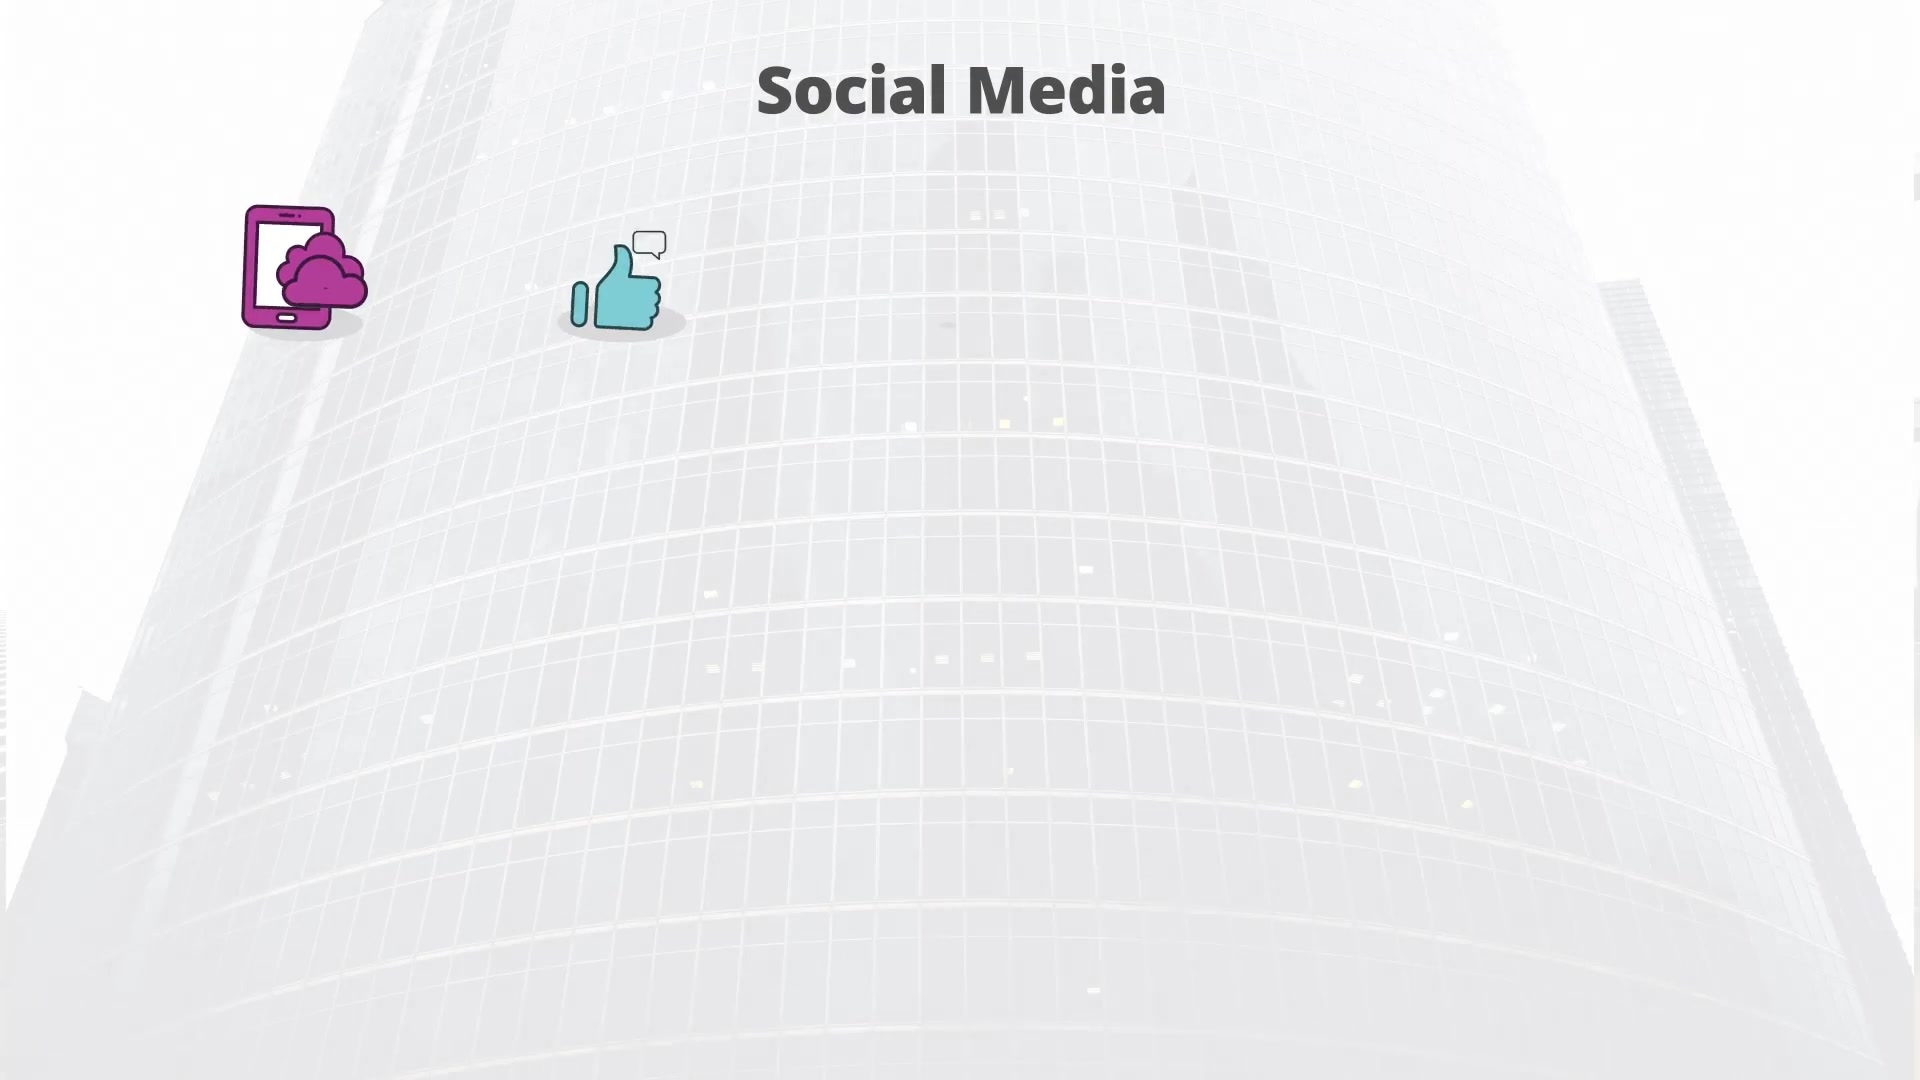 Social Media Flat Animation Icons - Download Videohive 23370431